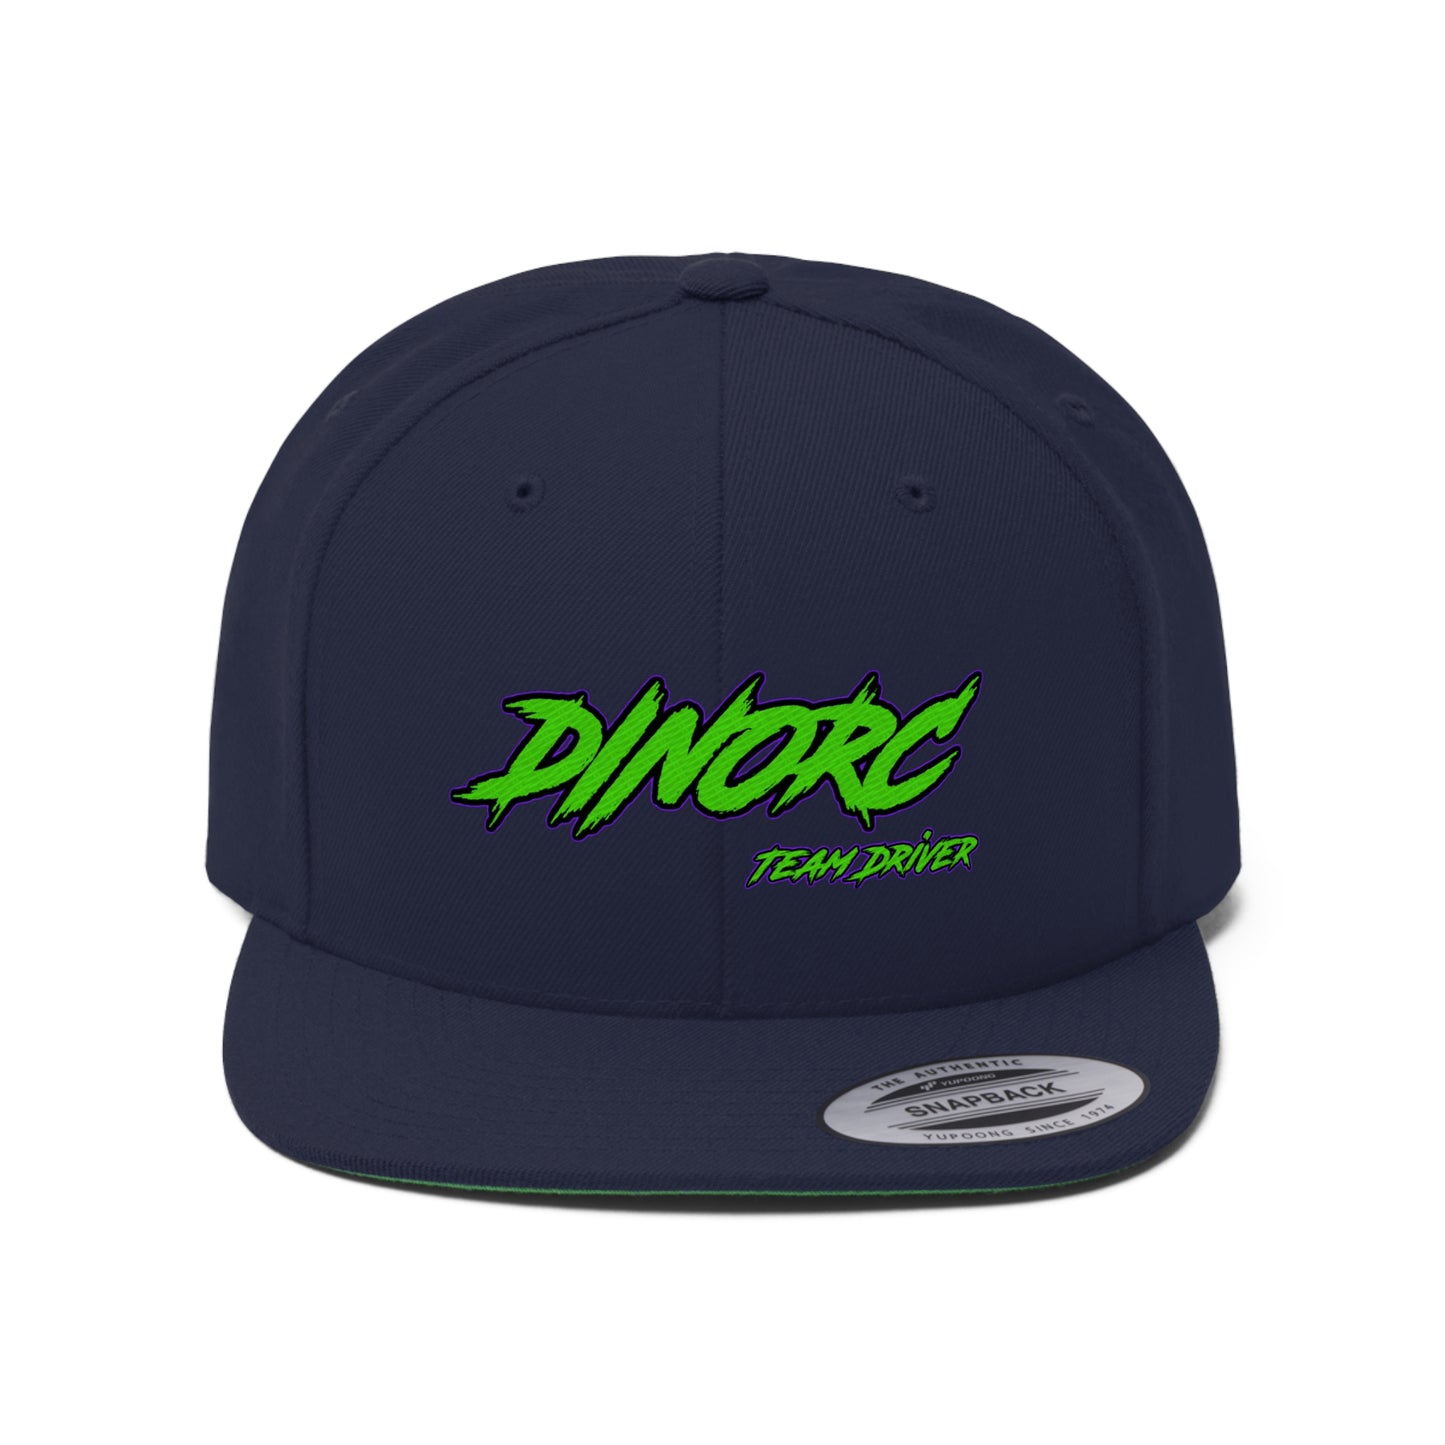 5 different colors and designs of DinoRC Logoed Flat Bill Hat